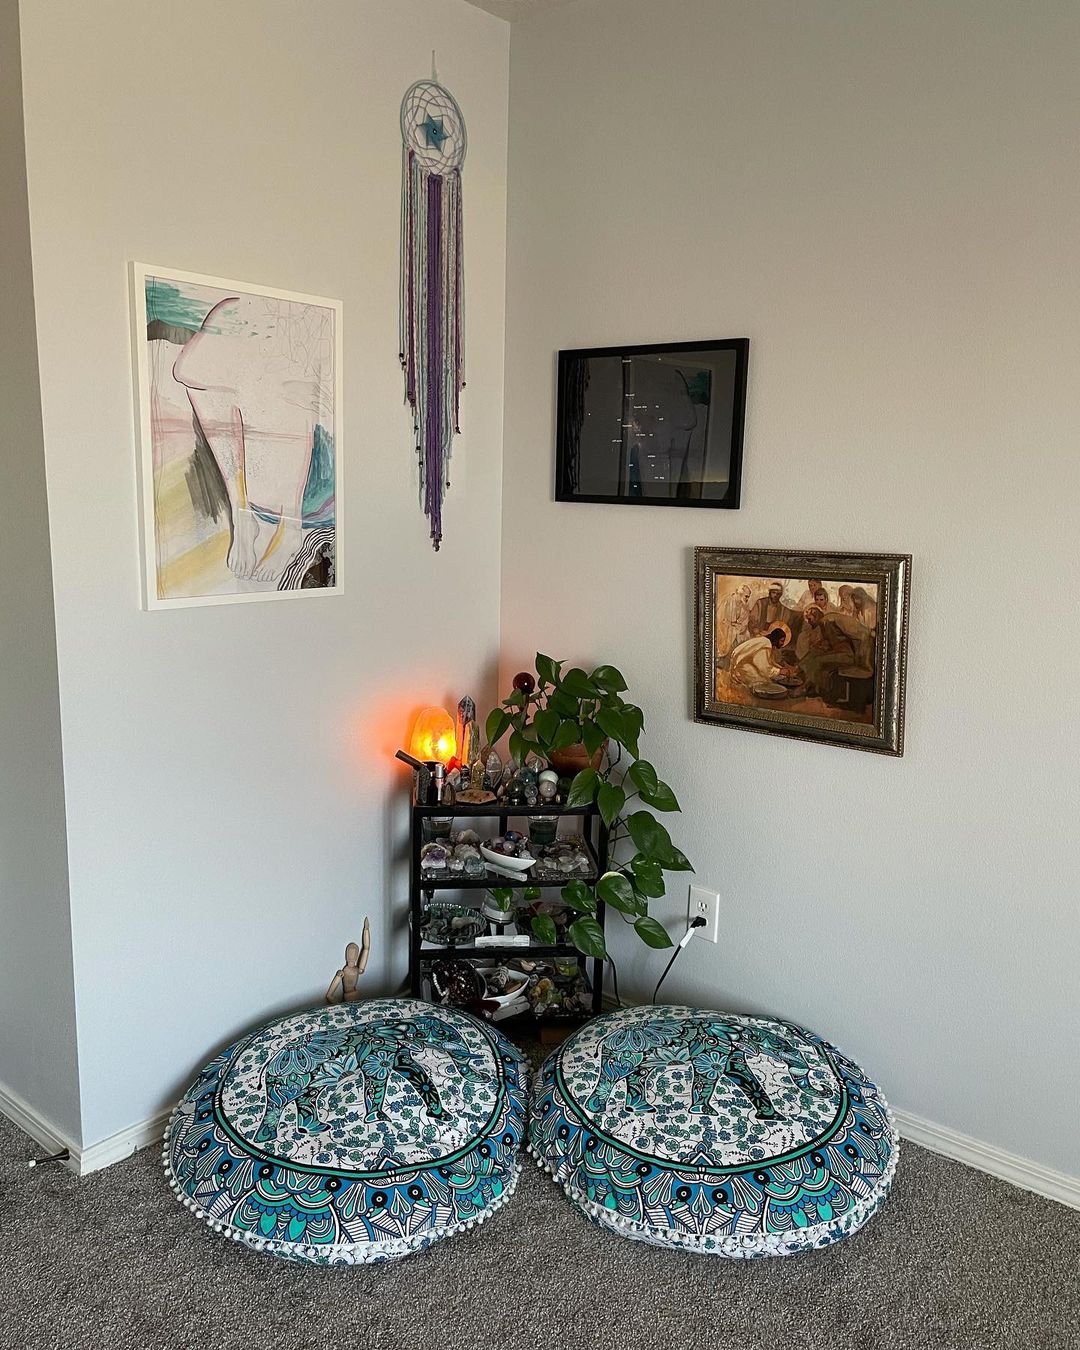 Meditation corner with two poufs and art hung on the walls. Photo by Instagram user @amethystwarriorqueen